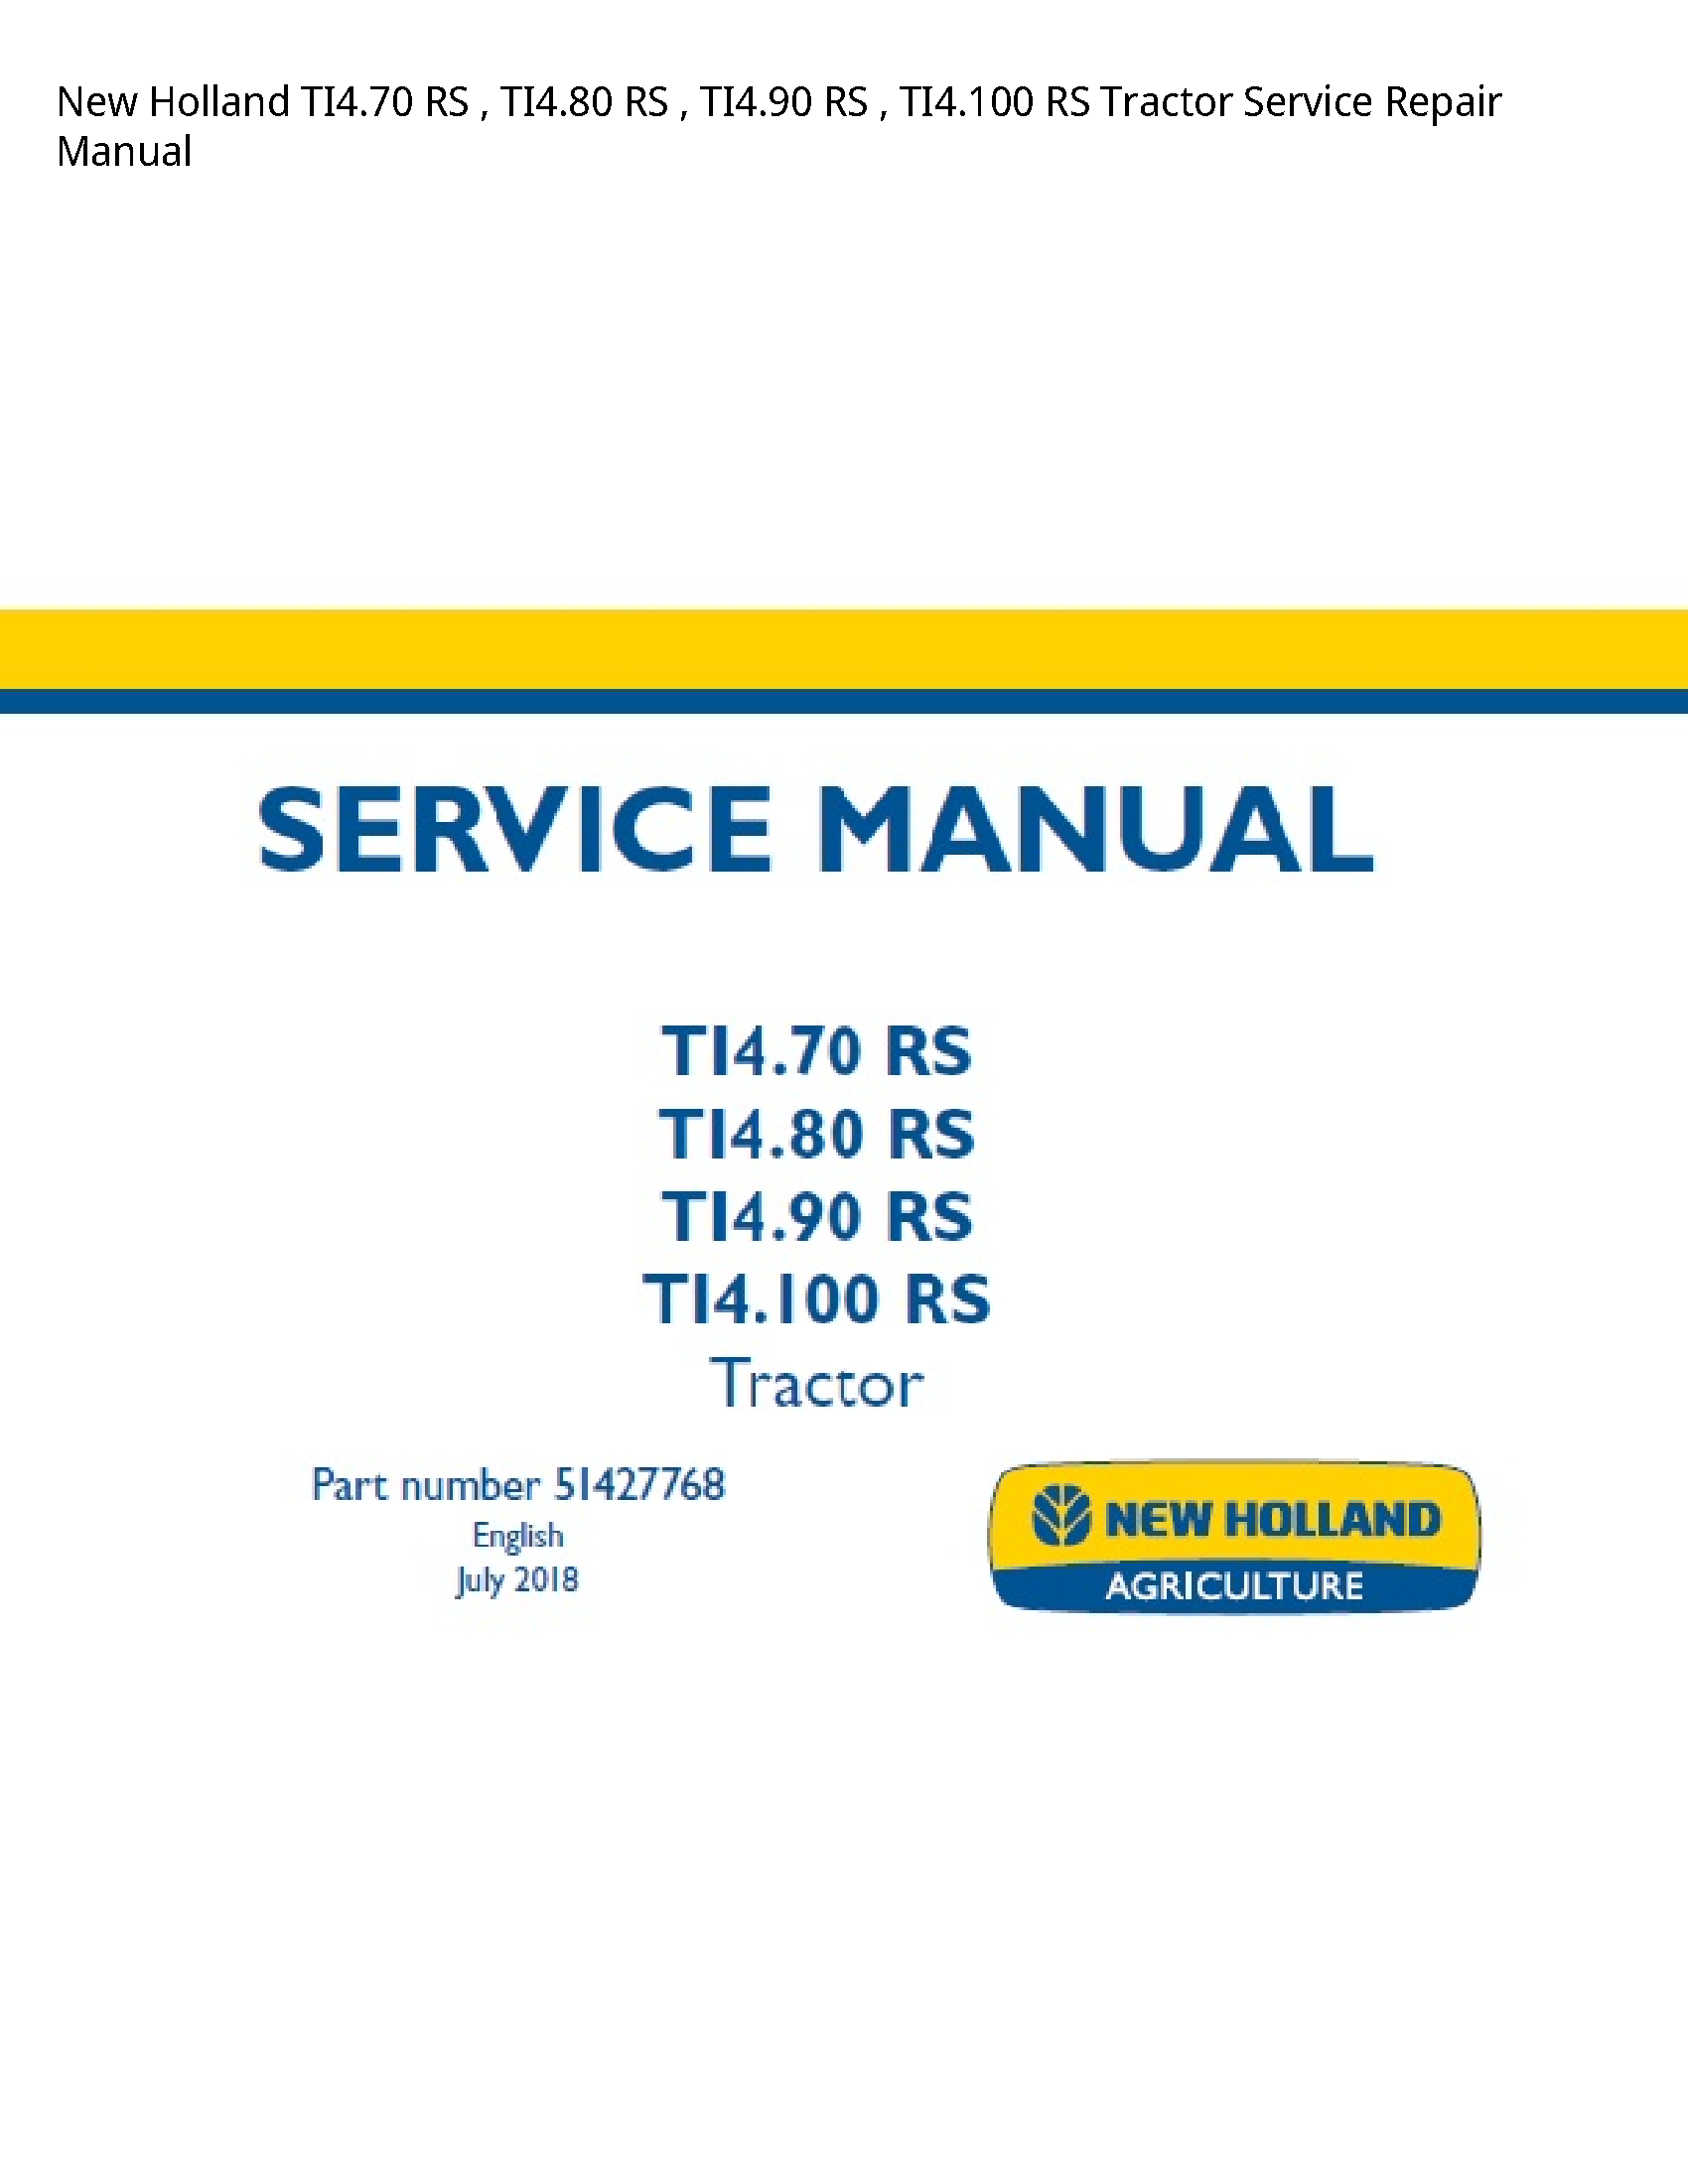 New Holland TI4.70 RS RS RS RS Tractor manual